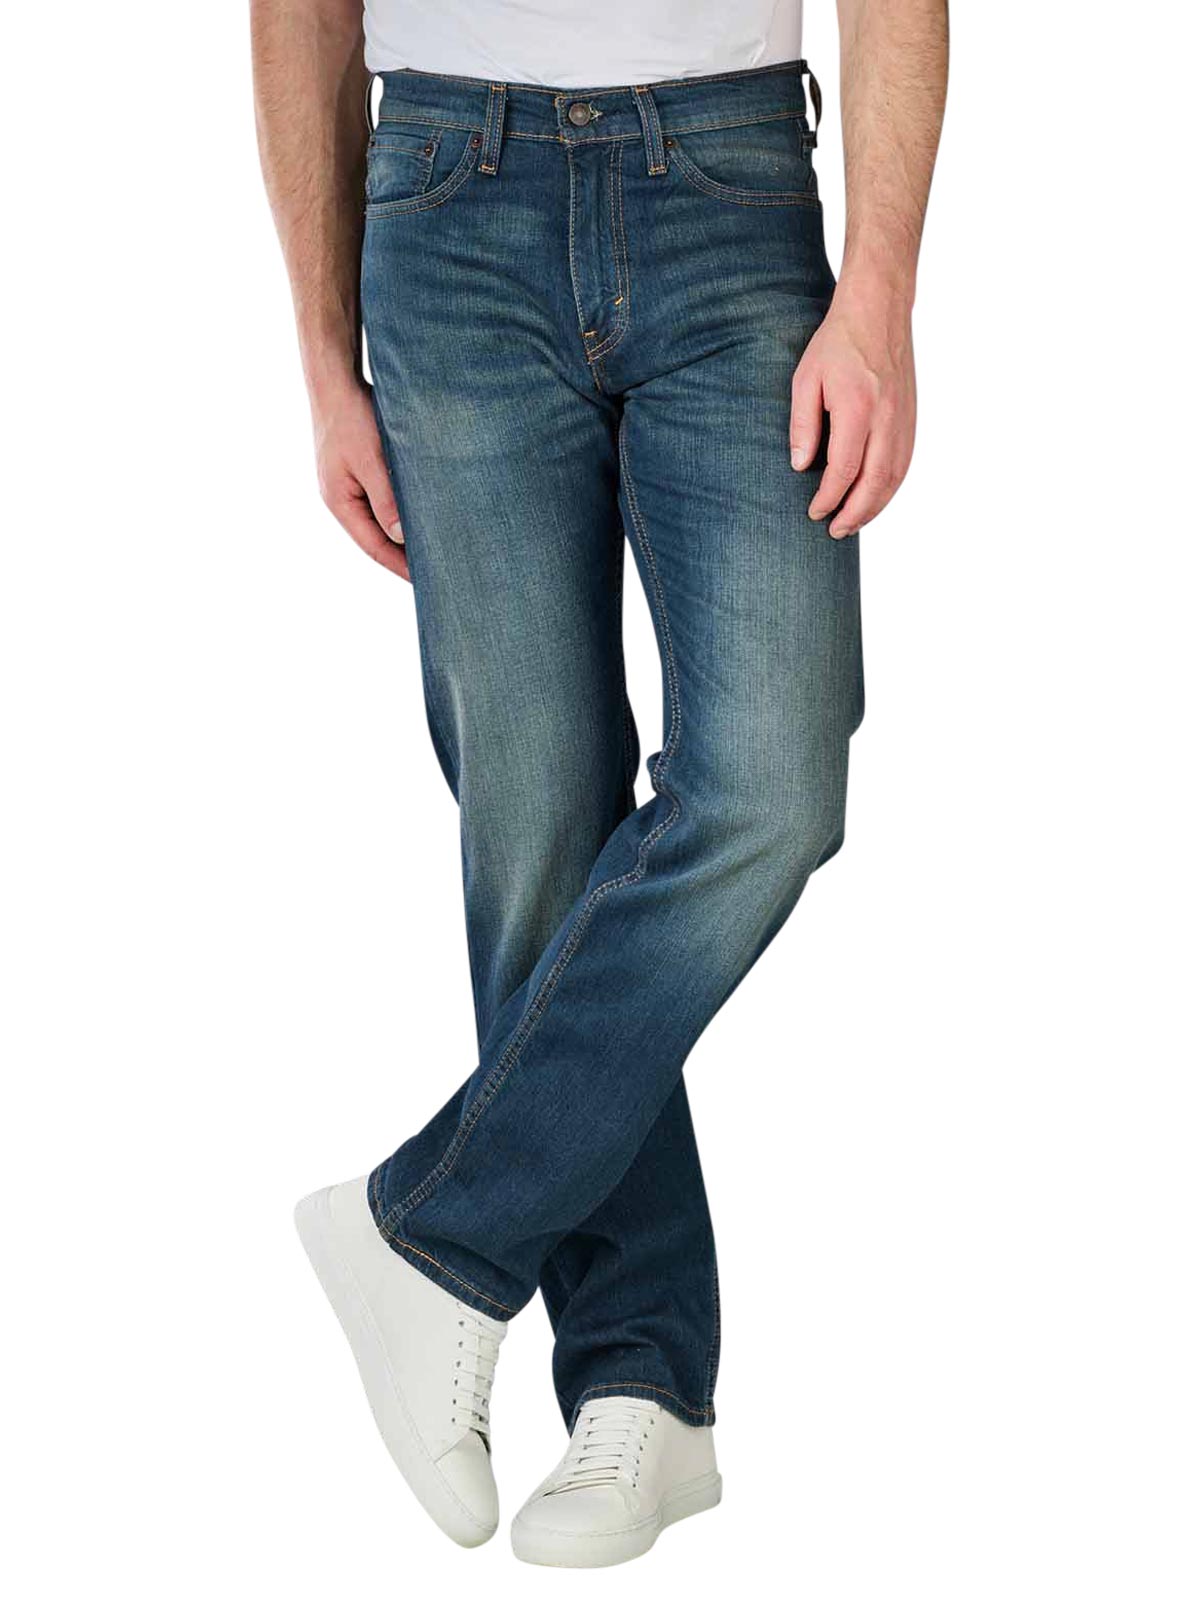 Levi's 505 Jeans Straight Fit Cash Levi's Men's Jeans | Free Shipping on   - SIMPLY LOOK GOOD